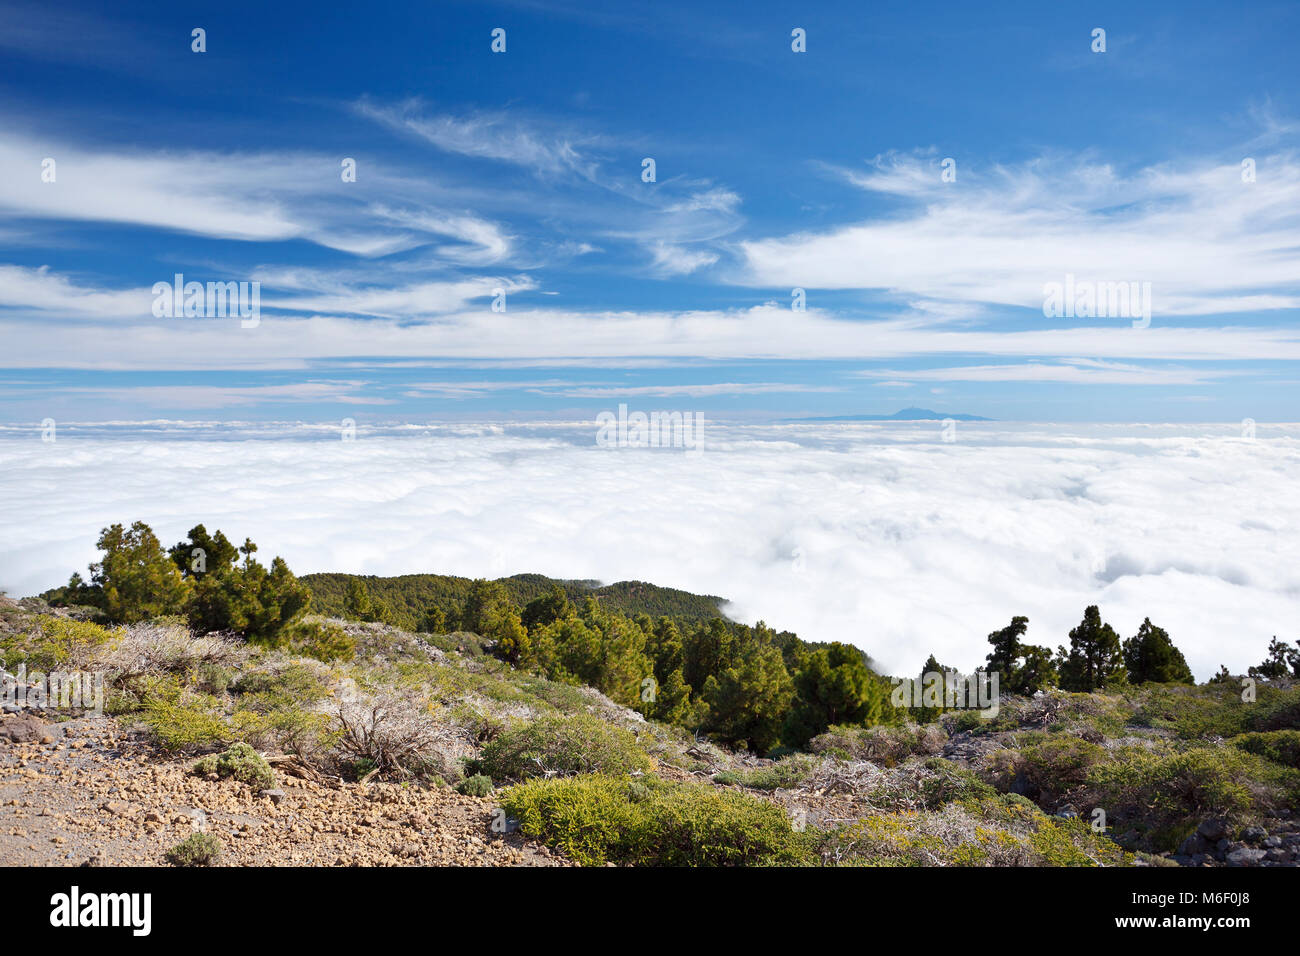 View from the Pico de la Nieve in La Palma, Spain to Tenerife floating on clouds. Stock Photo